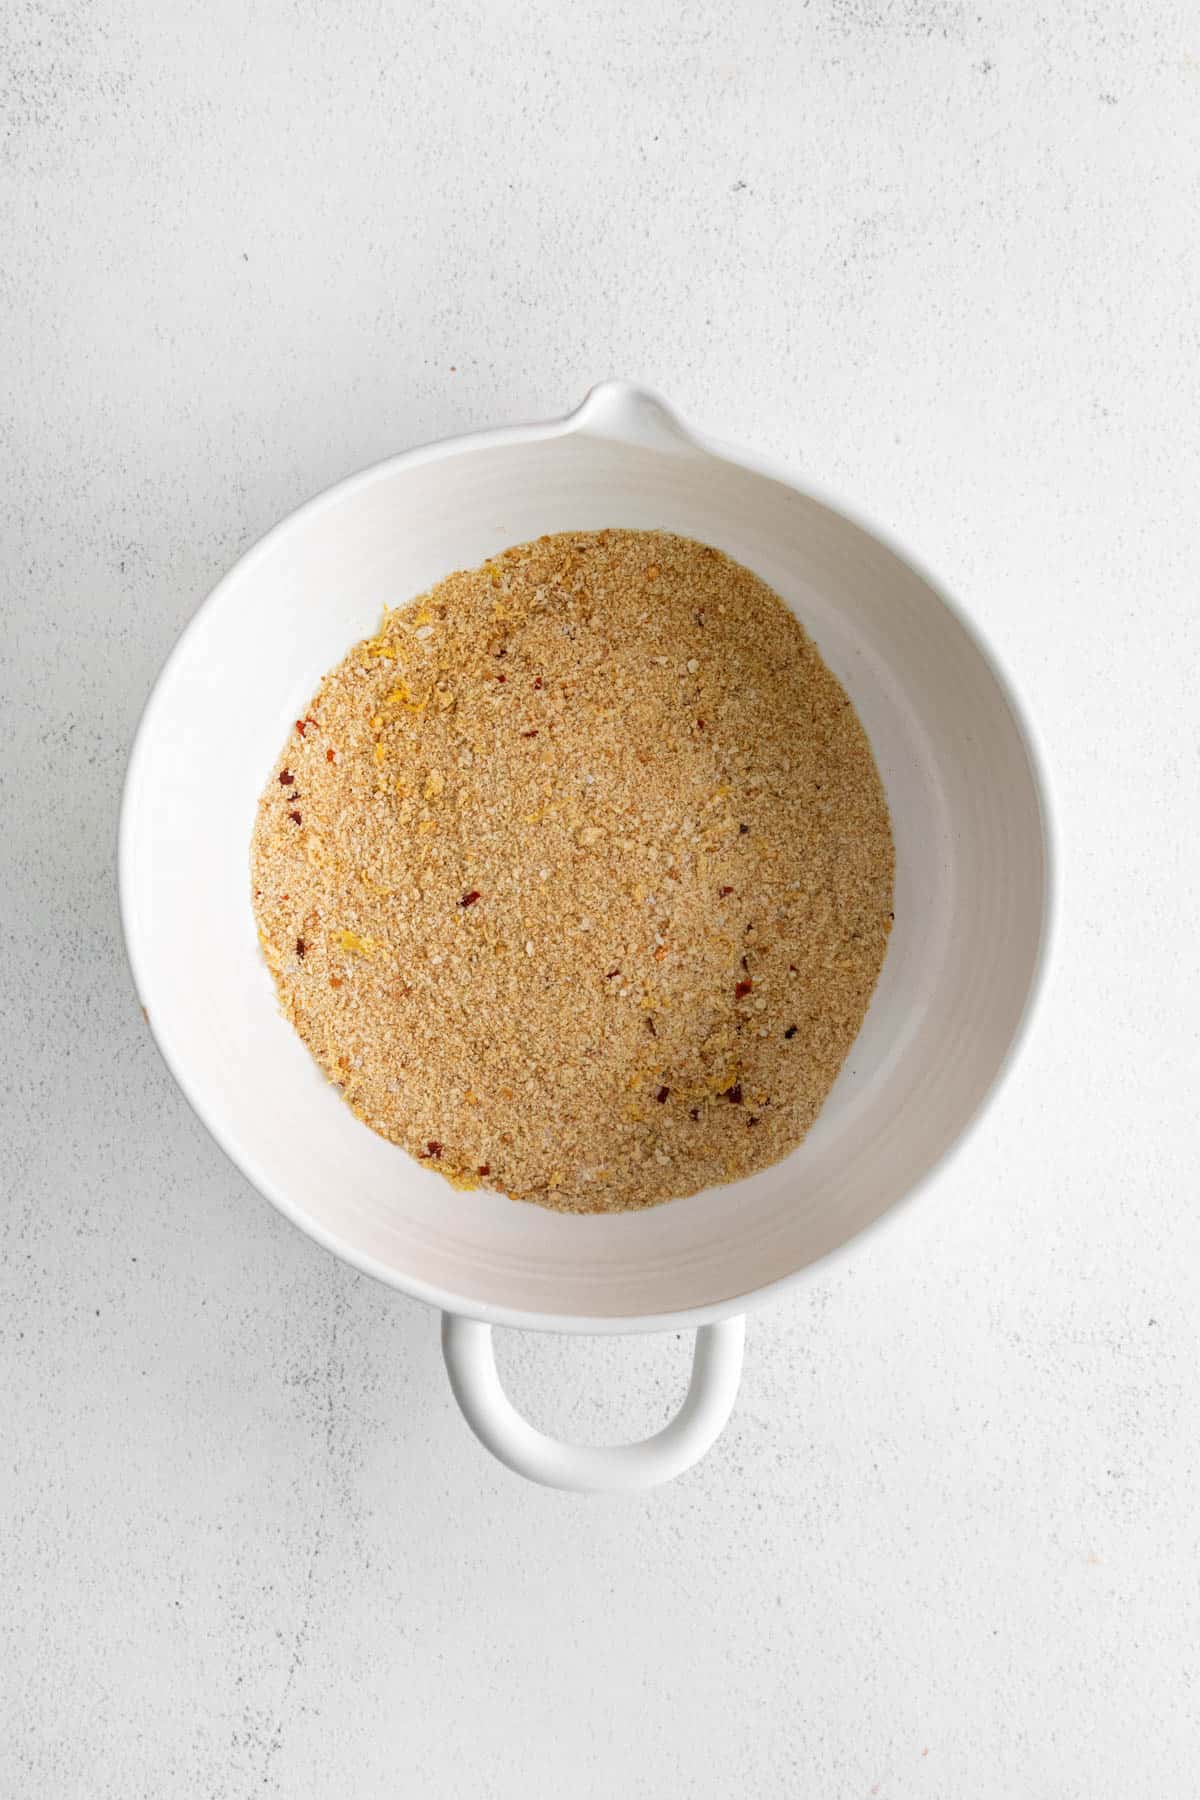 Breadcrumbs in a mixing bowl.